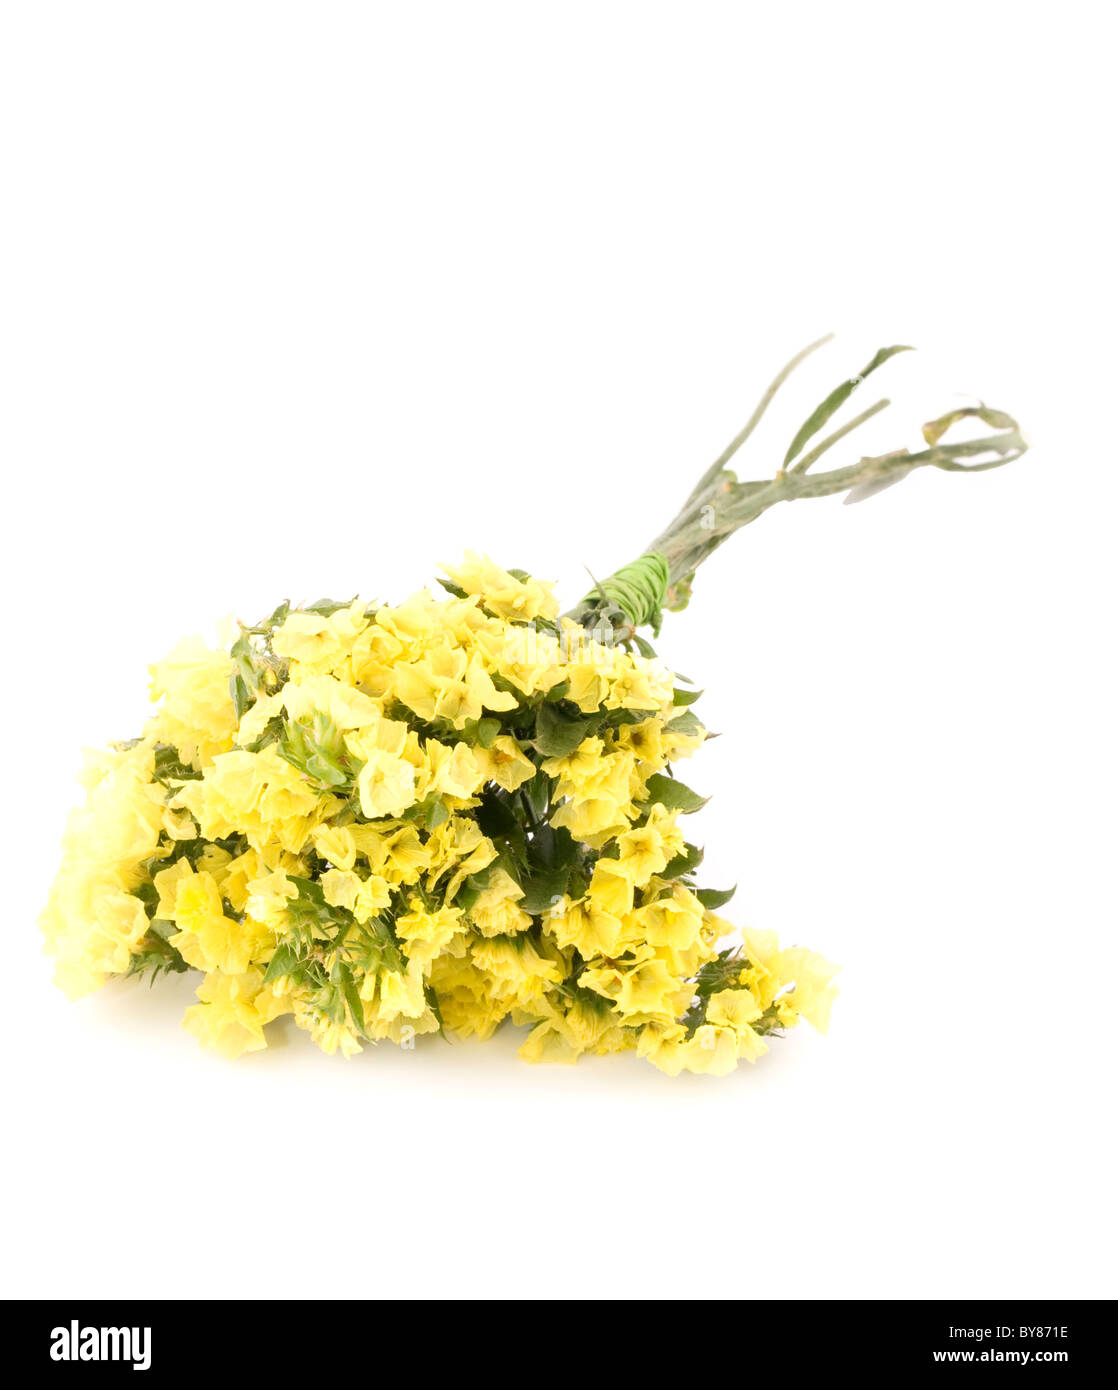 Small bouquet of yellow statice flowers on white background Stock Photo